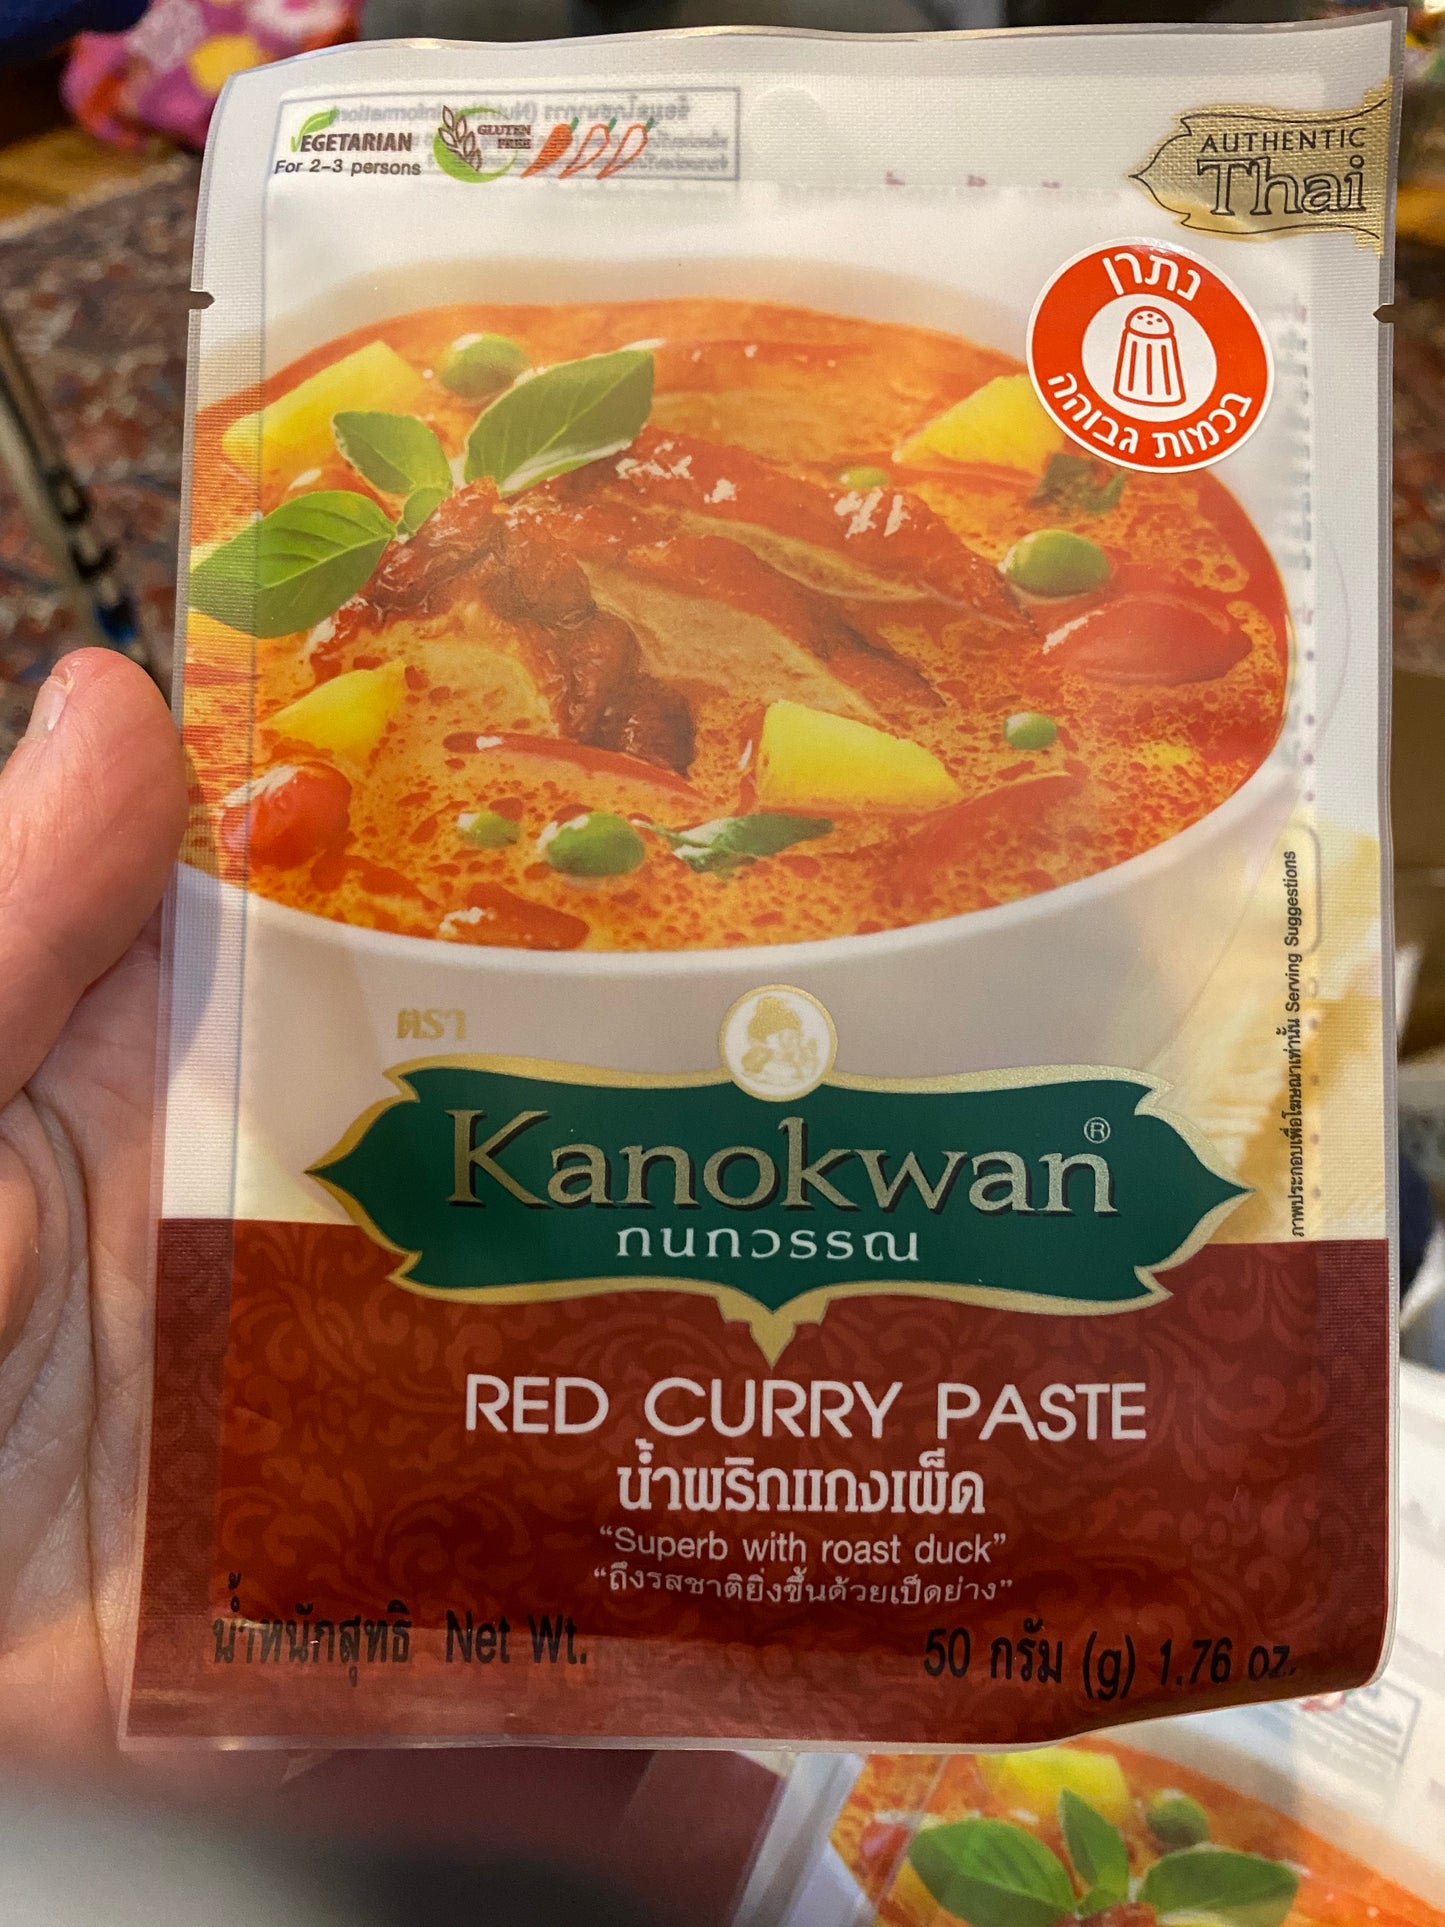 Kanokwan red curry paste - 1.76 oz bb date 12/6/2022